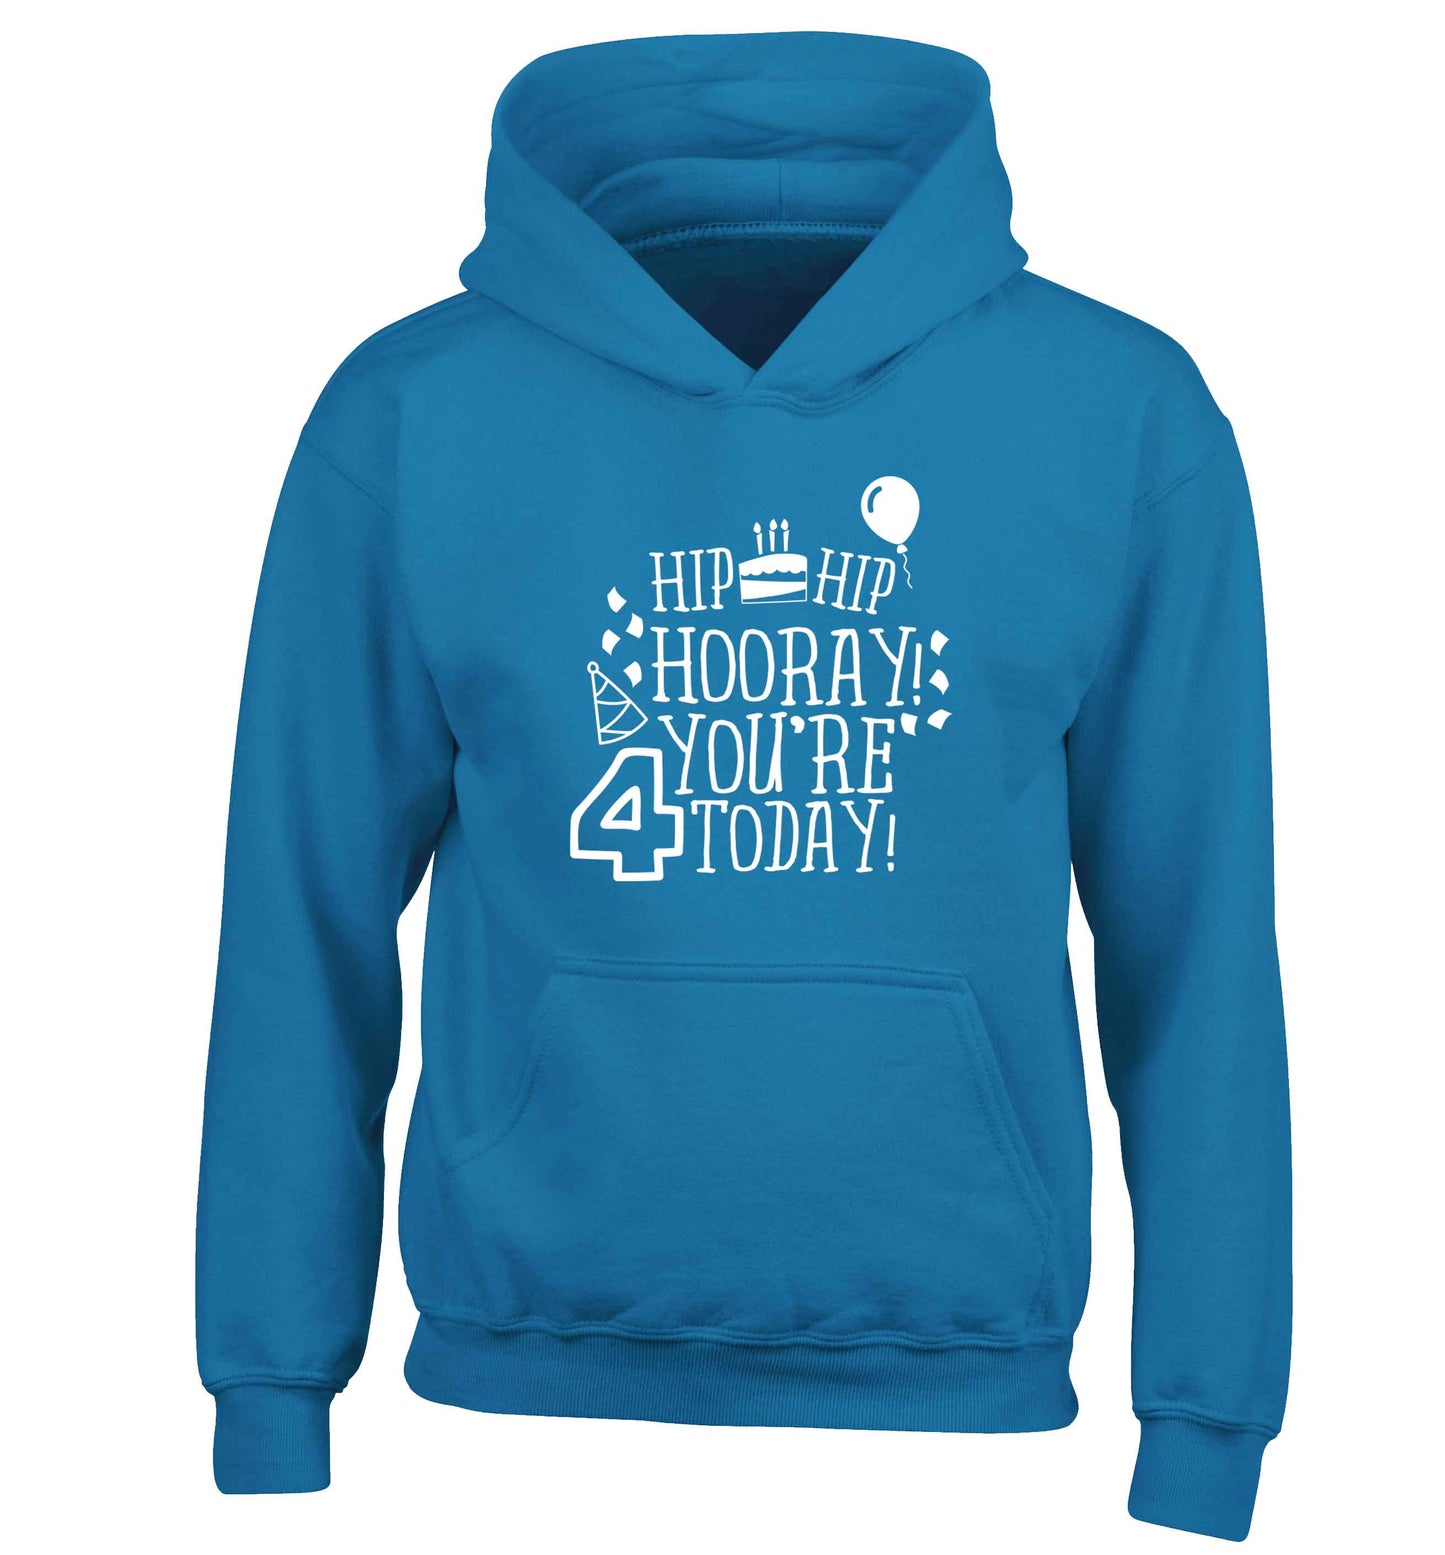 Hip hip hooray you're four today!children's blue hoodie 12-13 Years